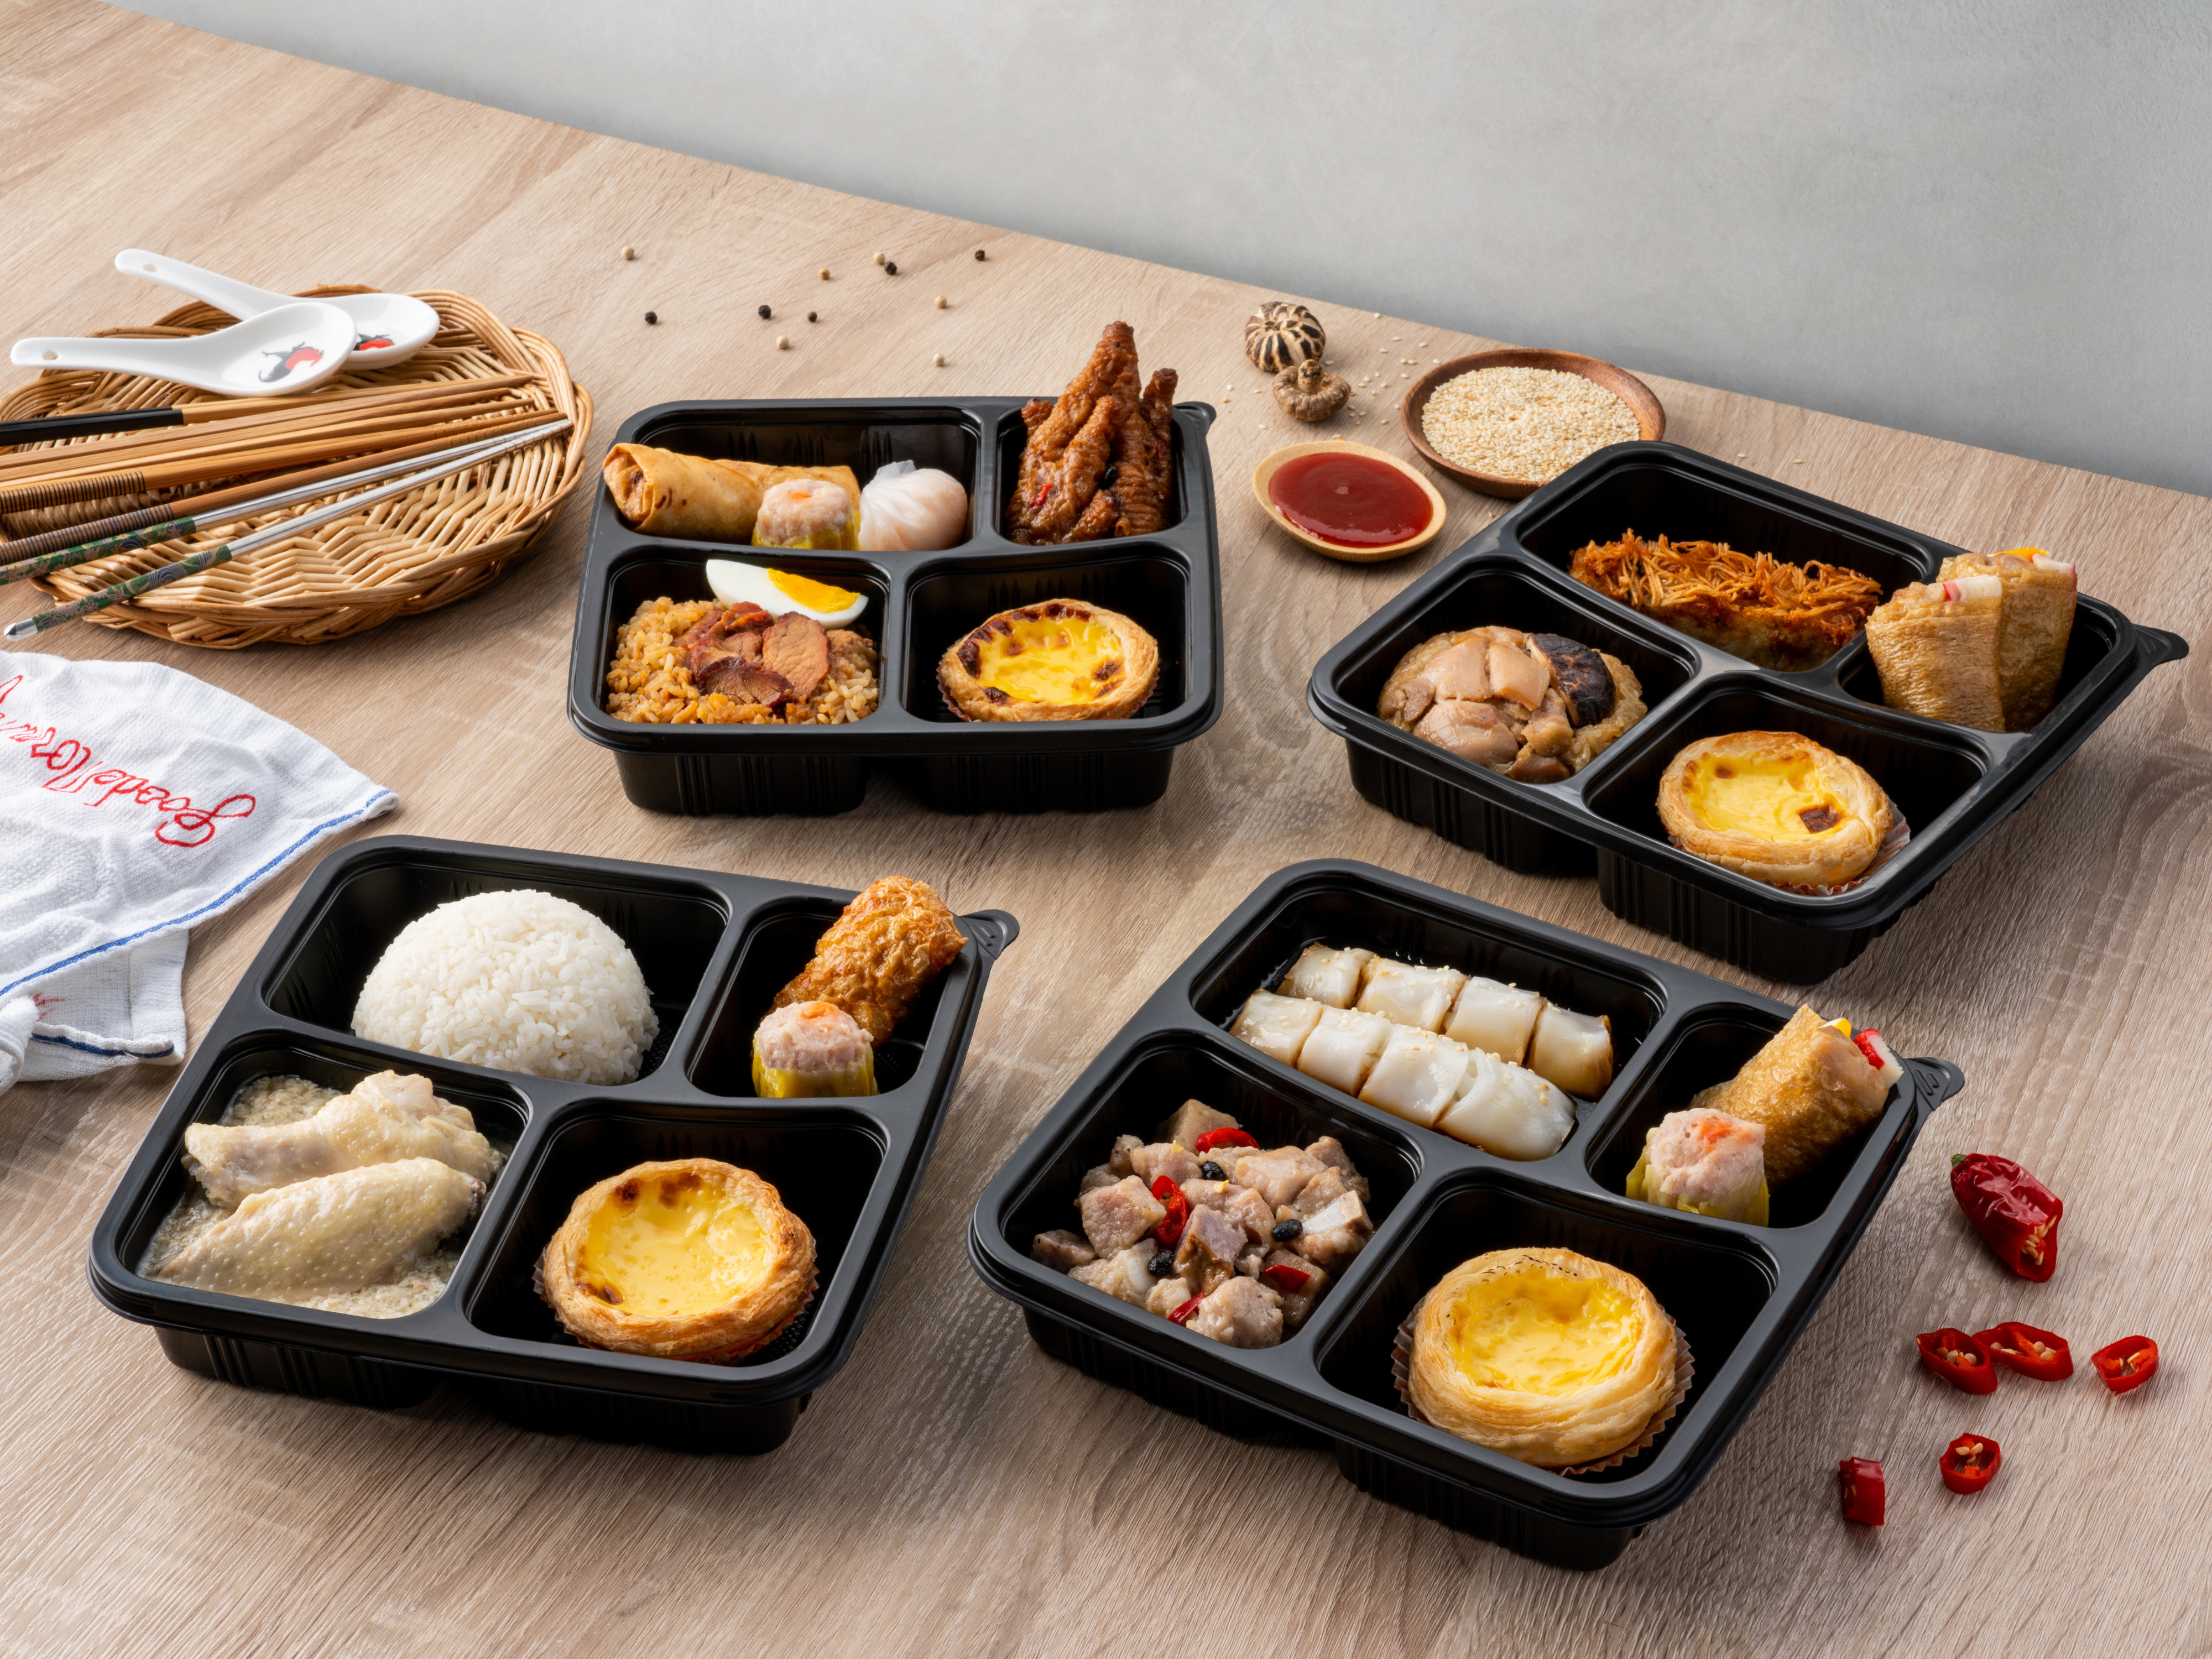 Bento Box delivery from Swee Choon Tim Sum, White Restaurant and more. Delivered islandwide in Singapore, powered by Oddle.